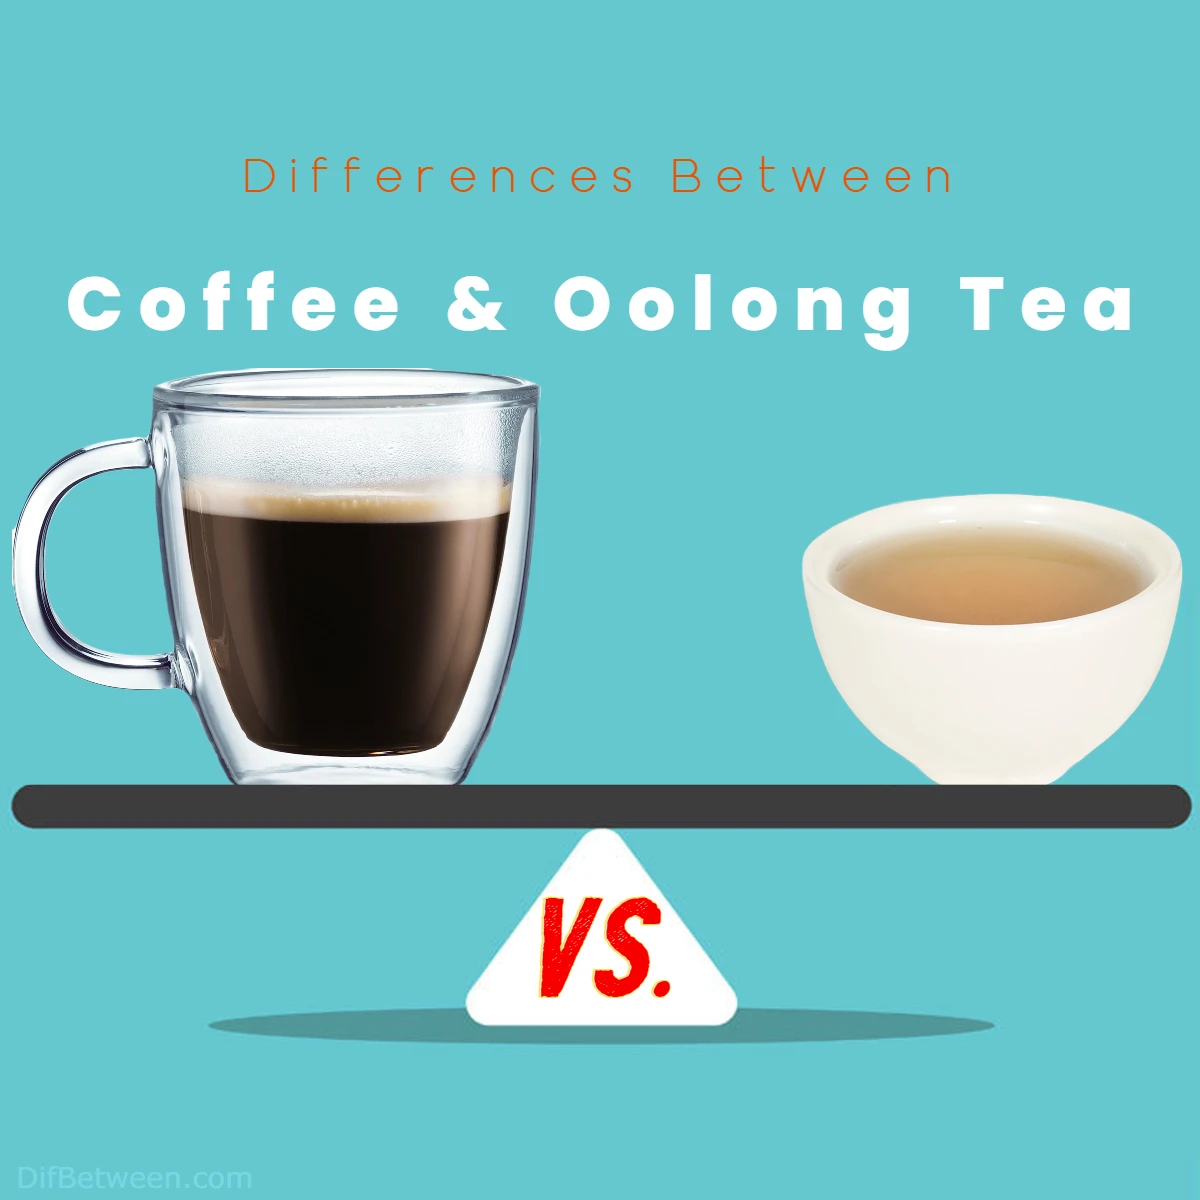 Differences Between Oolong Tea Caffeine and Coffee